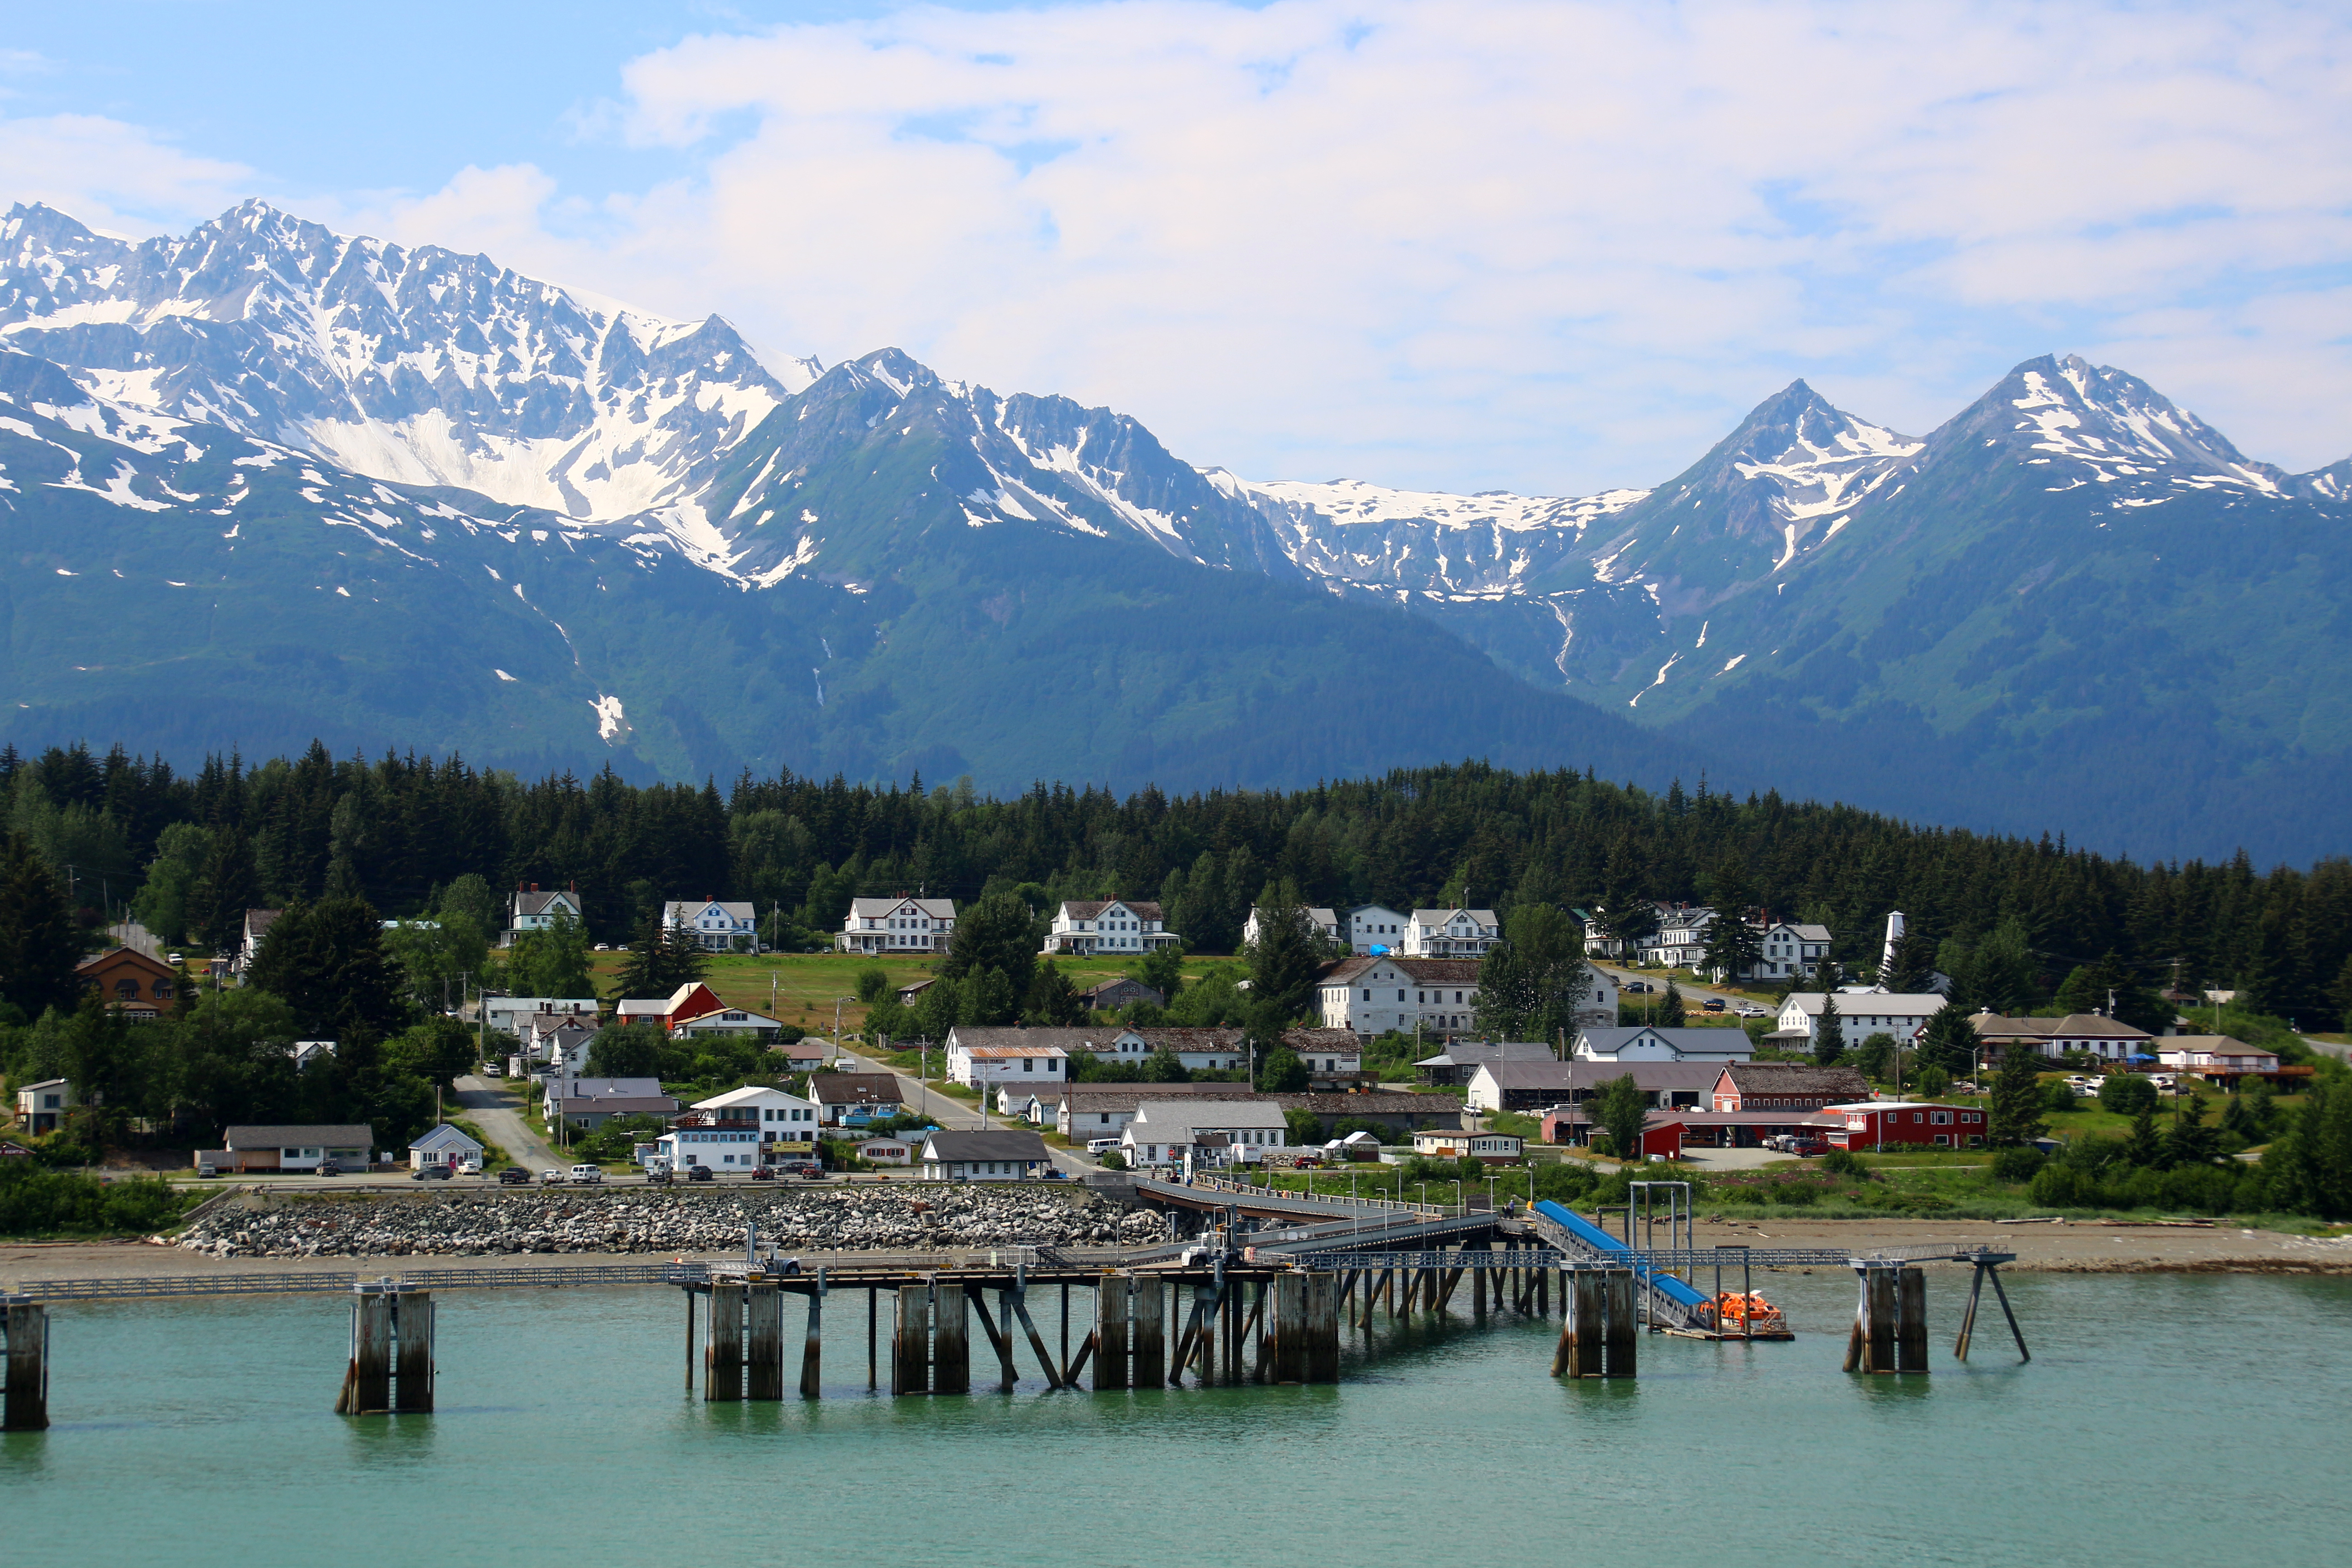 view of Fort William H. Seward in Haines, Alaska